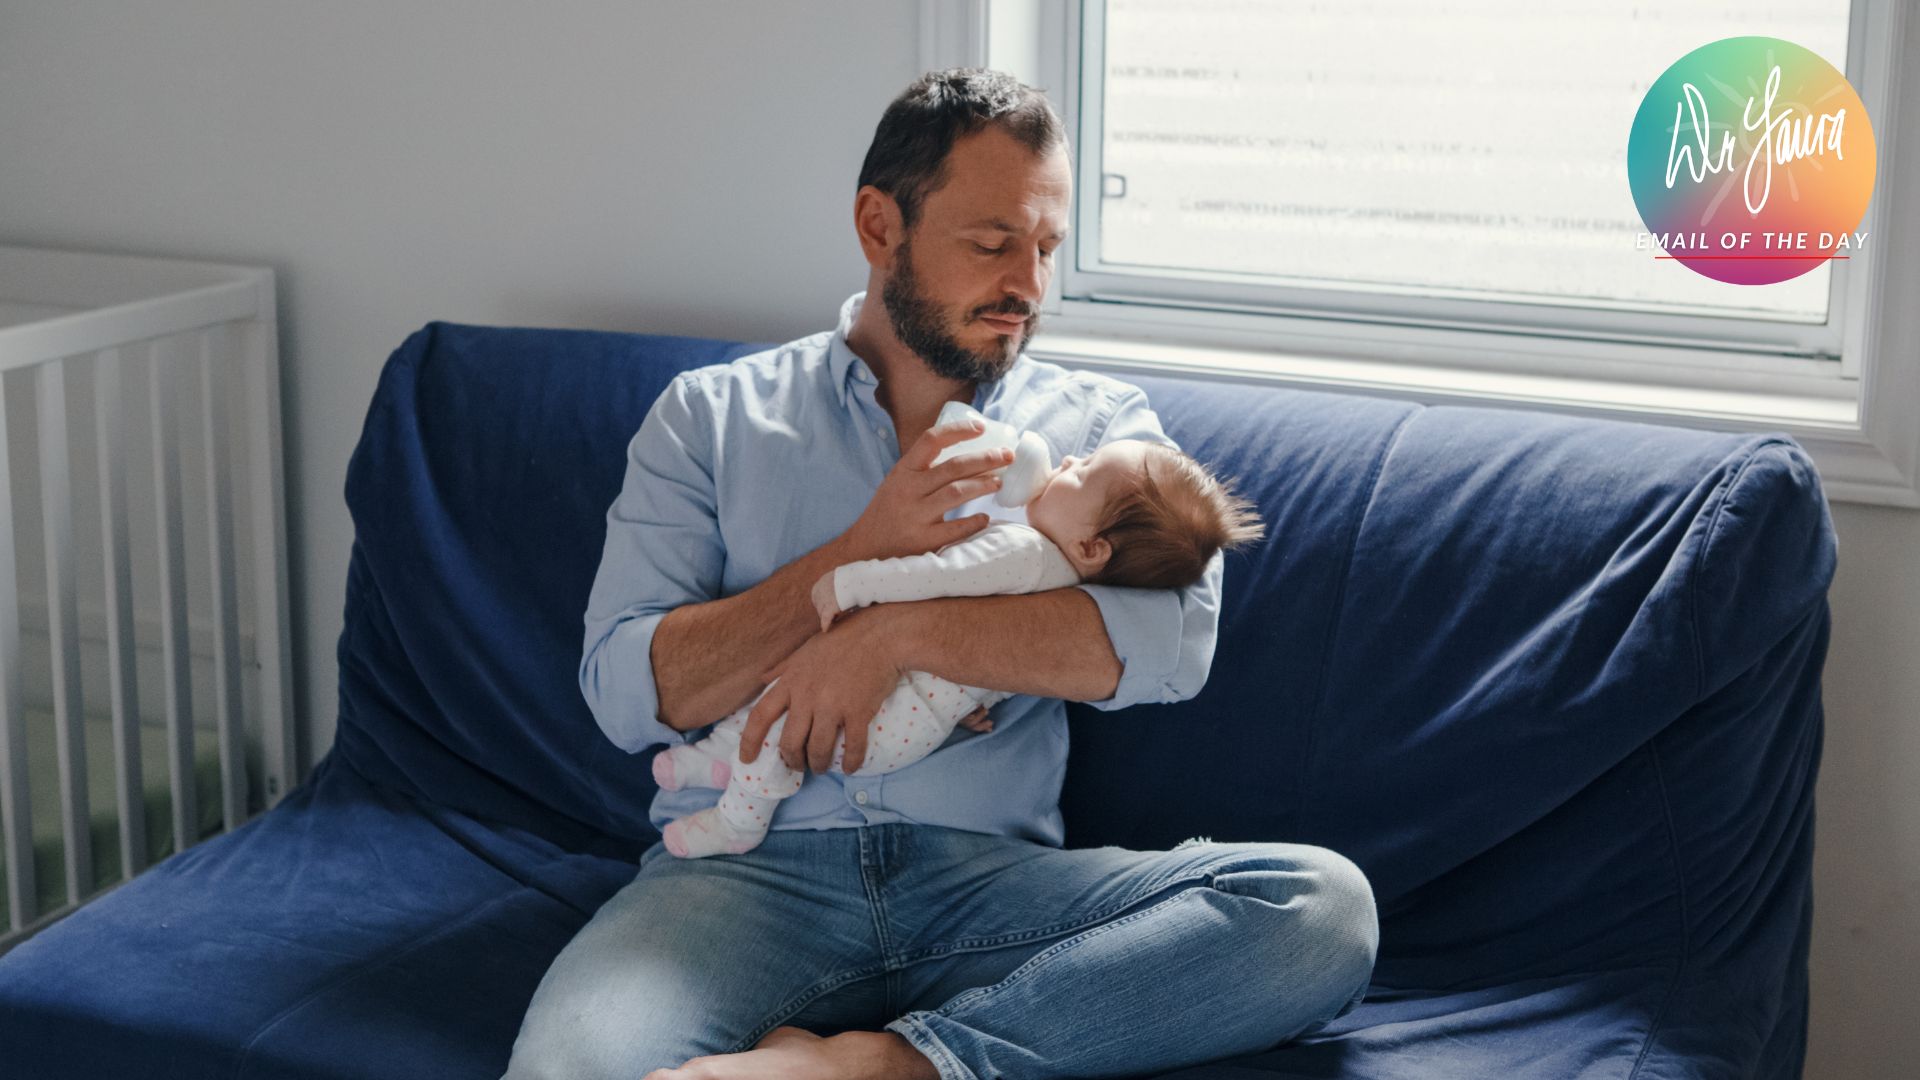 Man sits on couch and holds infant in his arm while feeding it a bottle